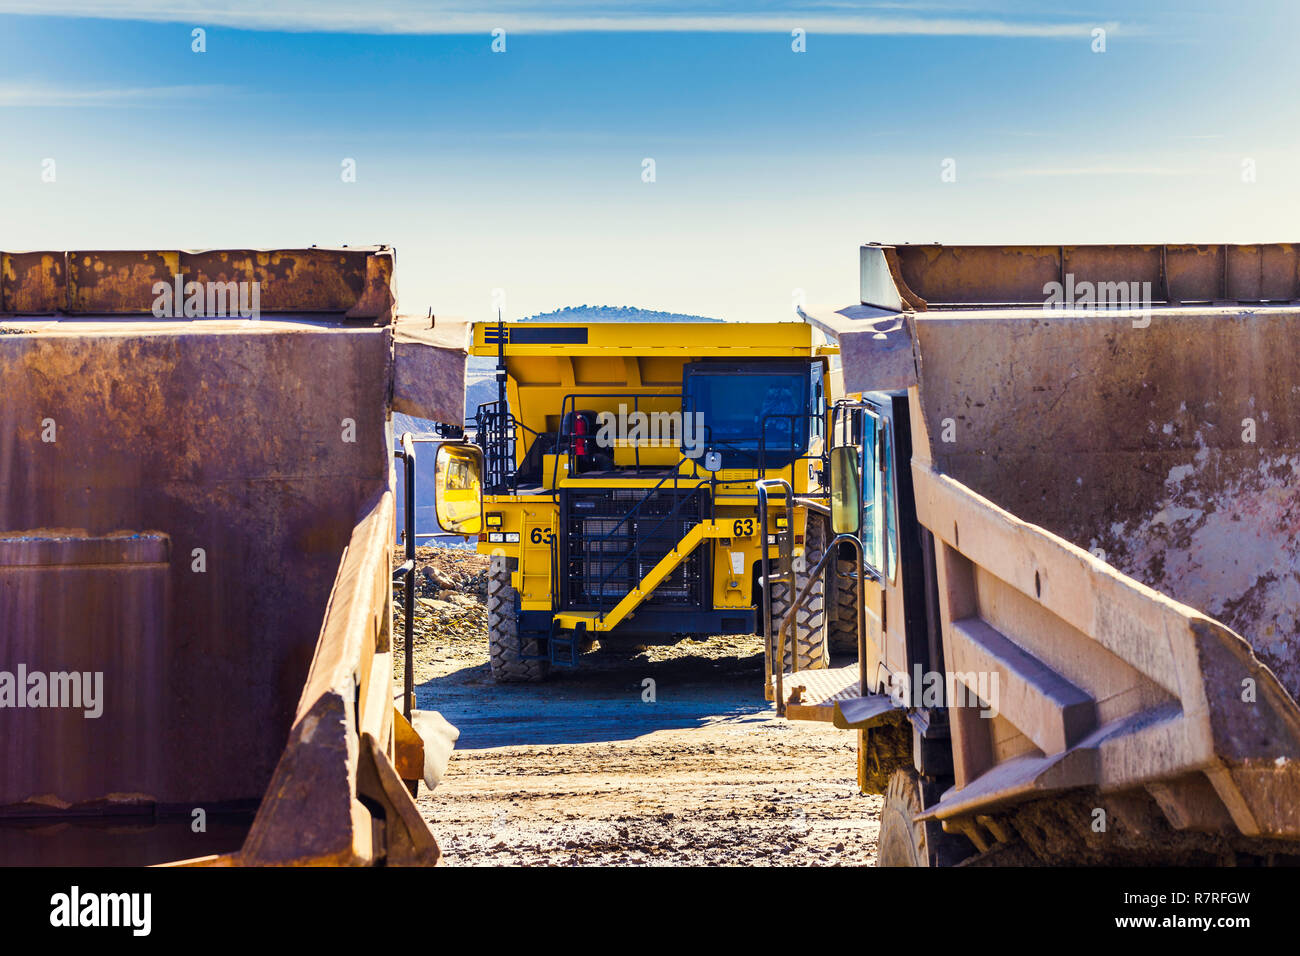 New and heavy quarry truck inside a quarry for mining, between two old quarry trucks in the foreground. Heavy equipment Mining industry. Stock Photo